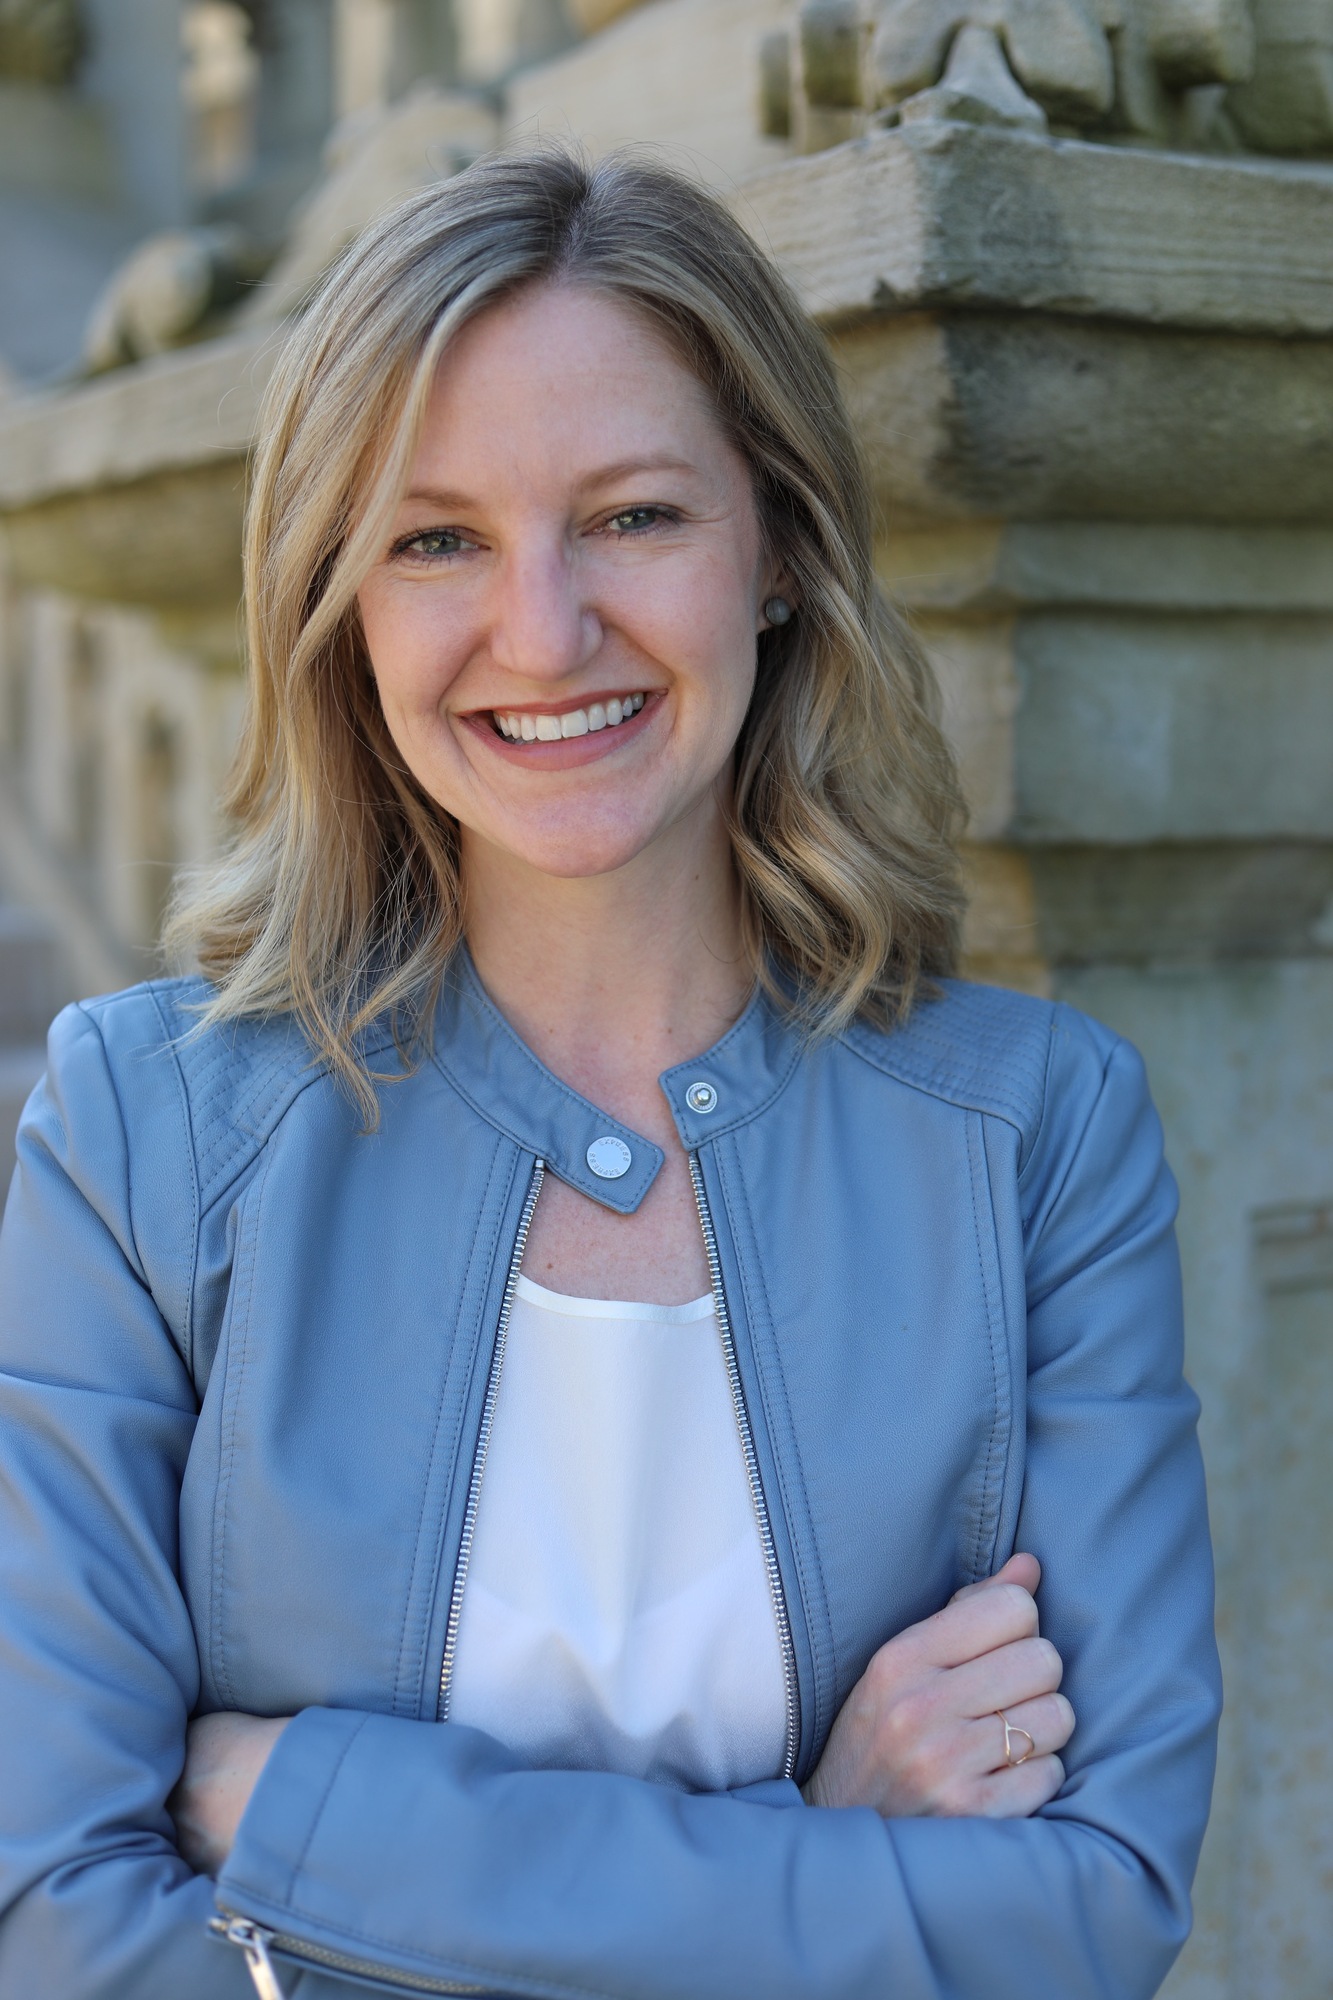 Public Policy alumna to lead Michigan’s State Budget Office